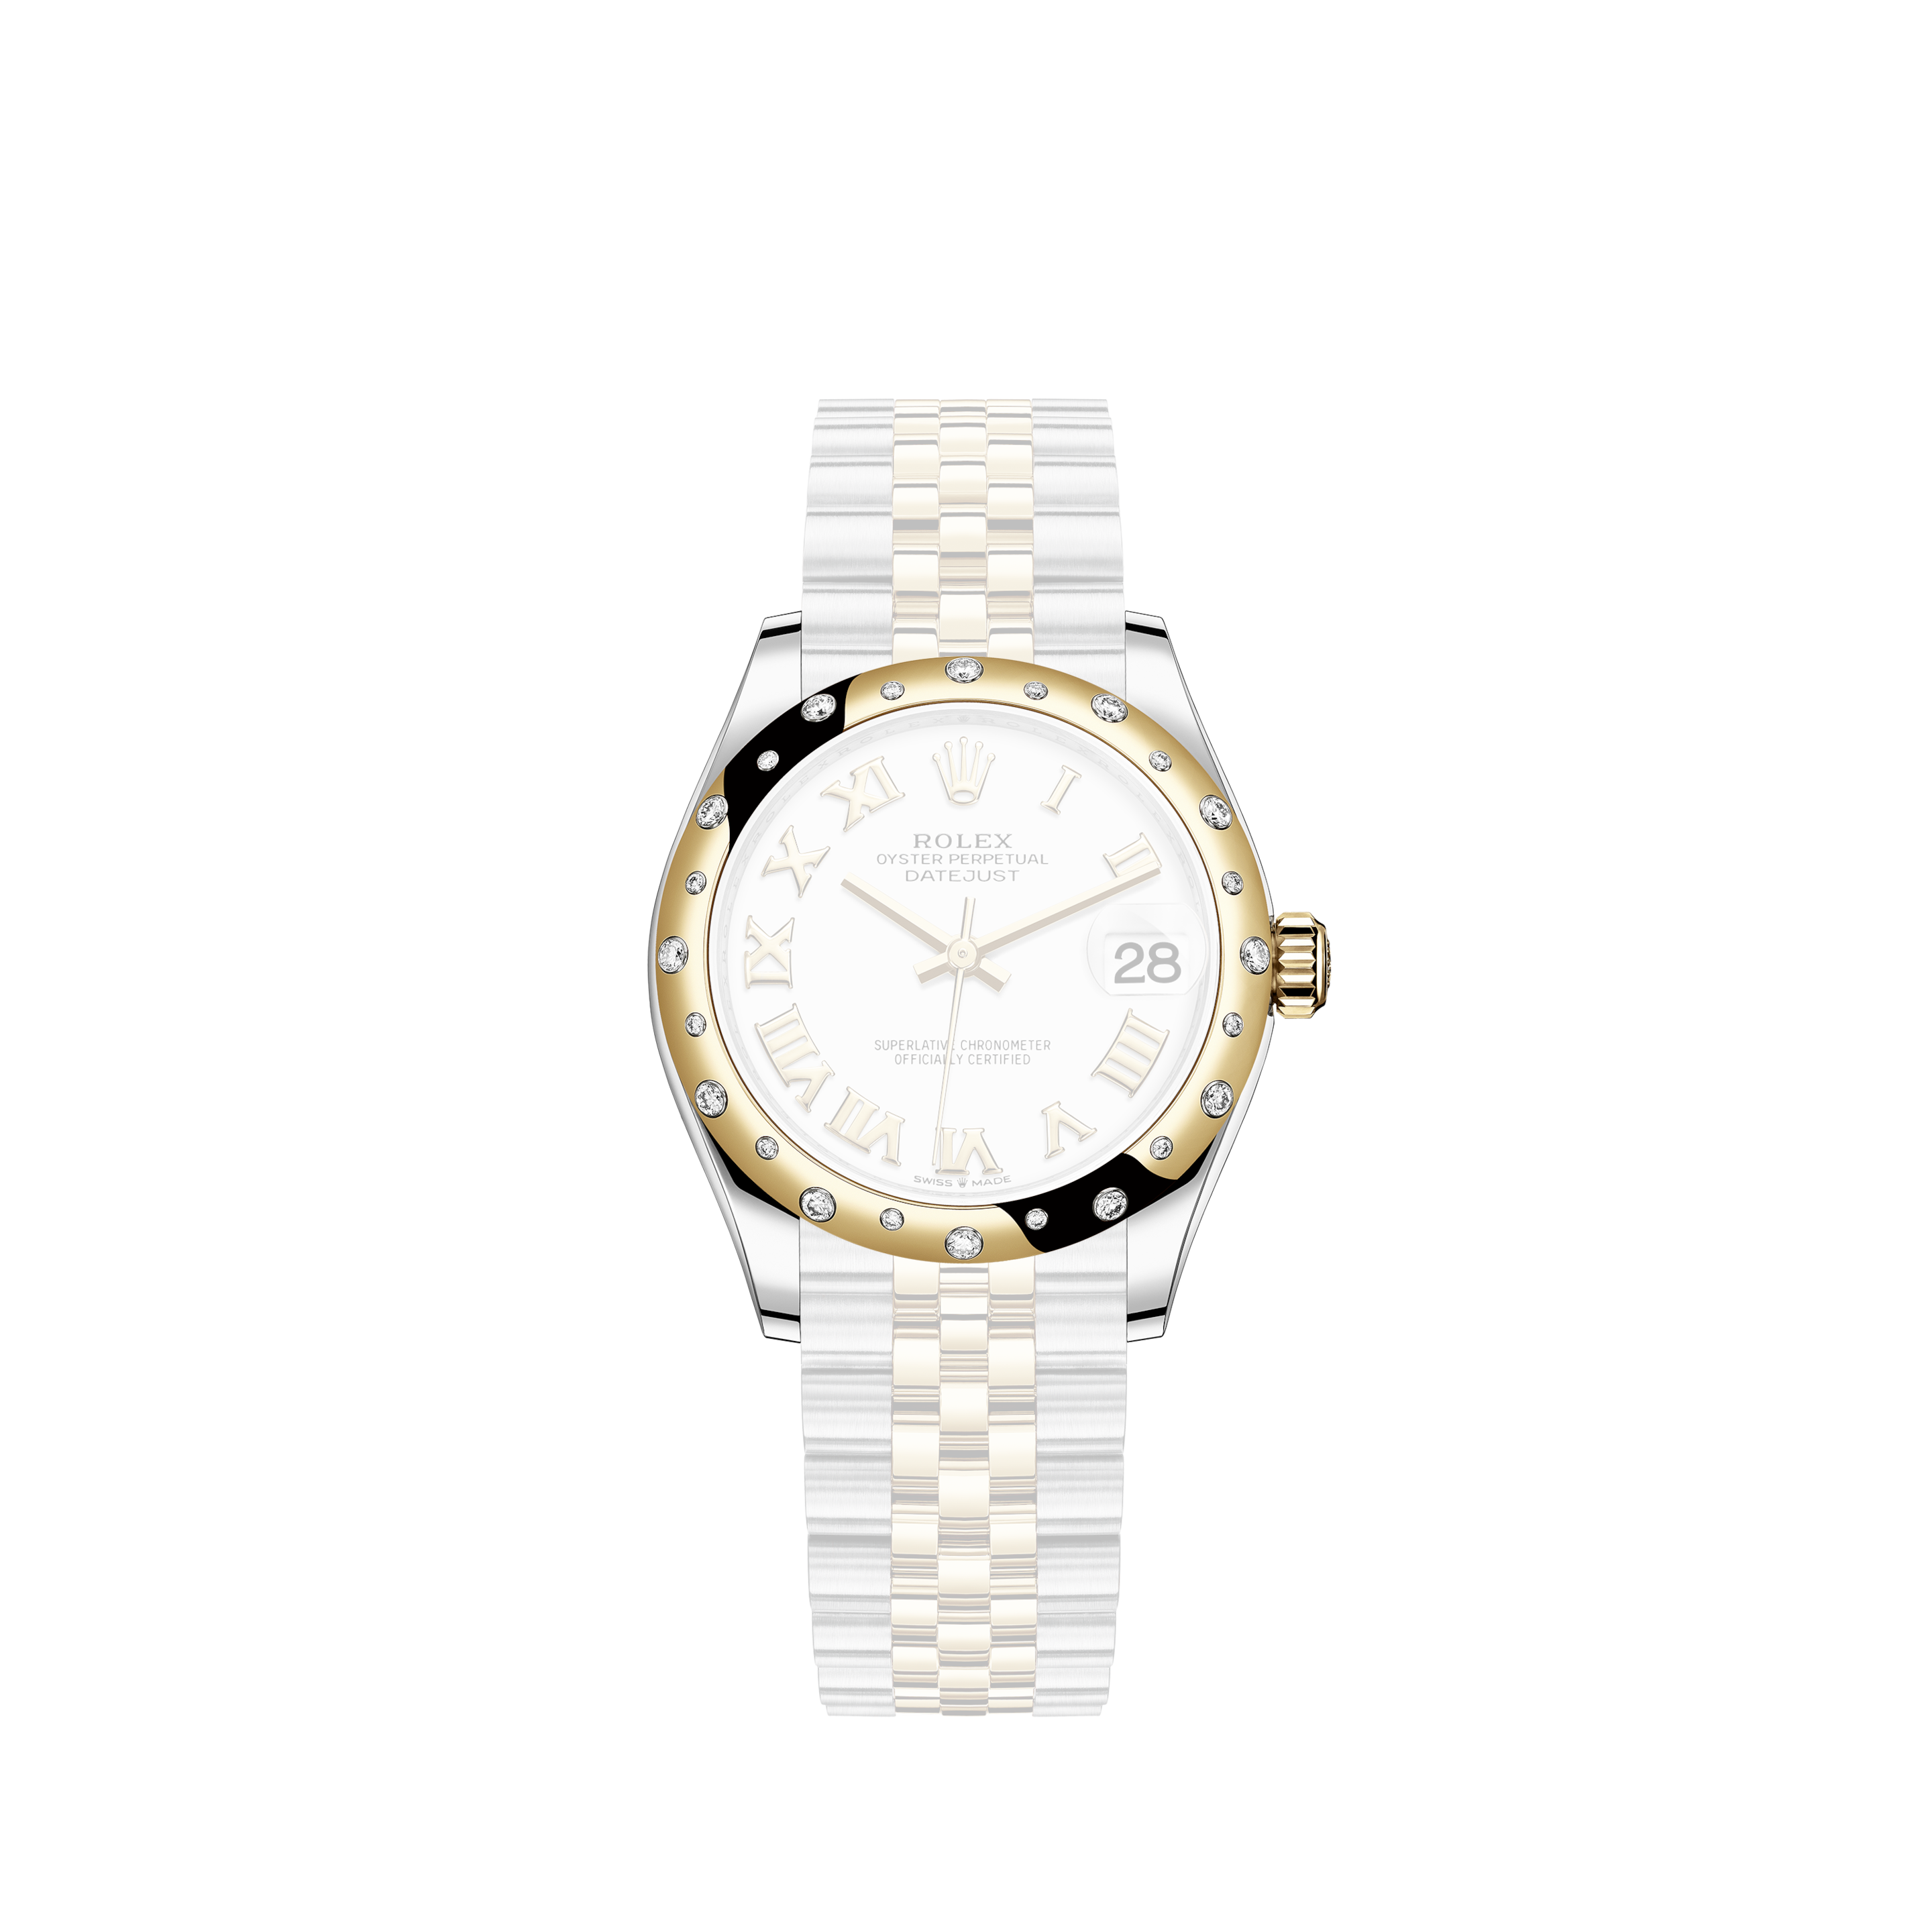 Rolex Datejust 16233 / Gold Dial Two-Tone / BOX & PAPERS / Gold Steel / Jubilee / 36mm / 1991Rolex Datejust 16233 / Gold Dial Two-Tone / BOX & PAPERS / Gold Steel / Jubilee / 36mm / 1997